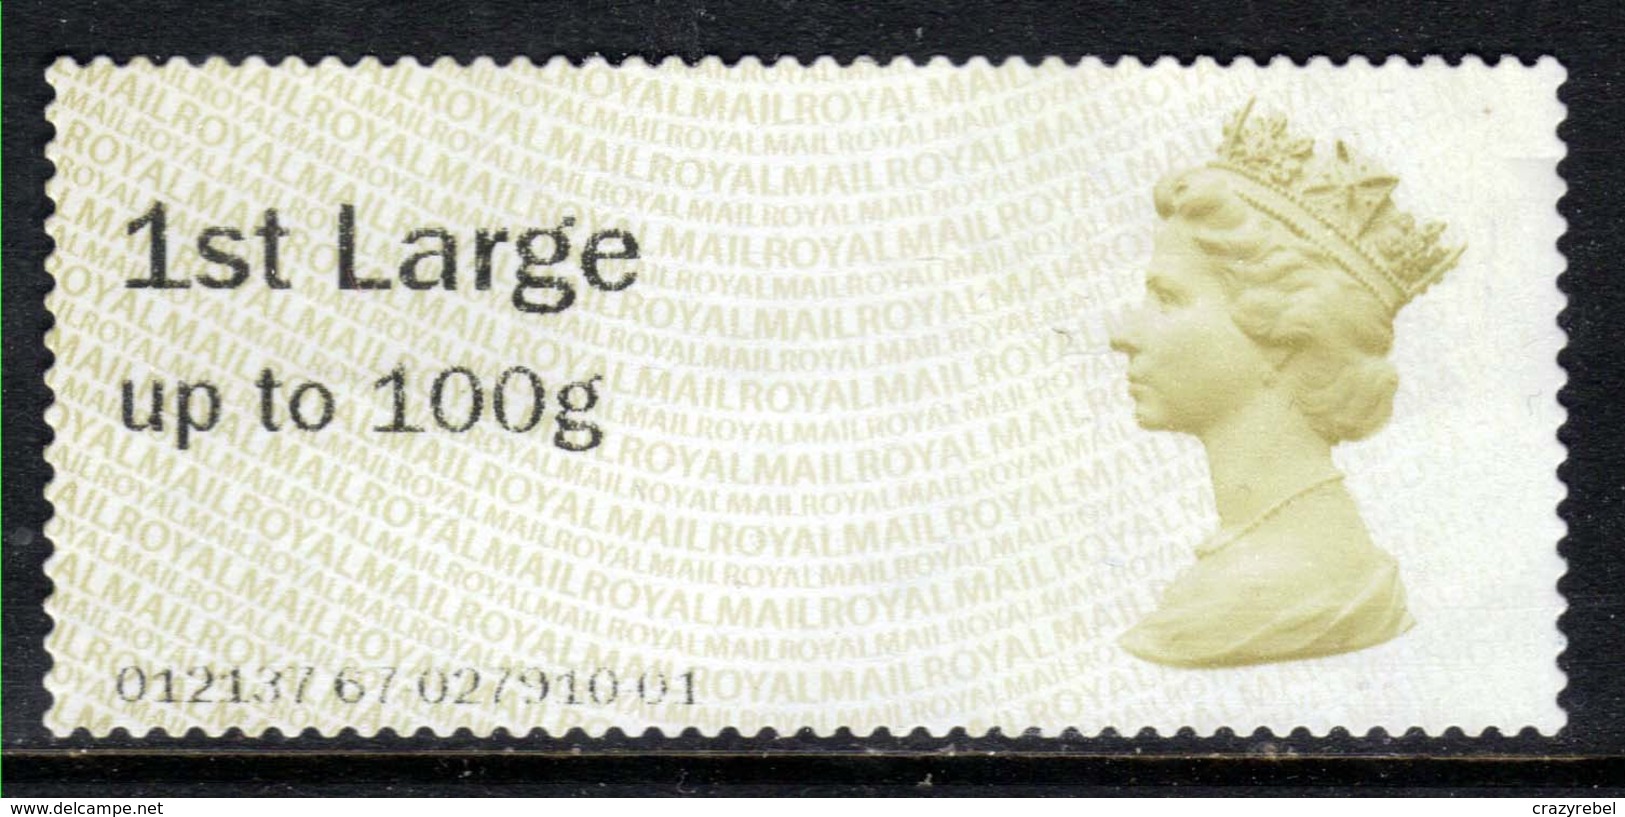 GB 2014 QE2 1st Large Post & Go Olive Brown No Gum Unused ( D1296) - Post & Go Stamps